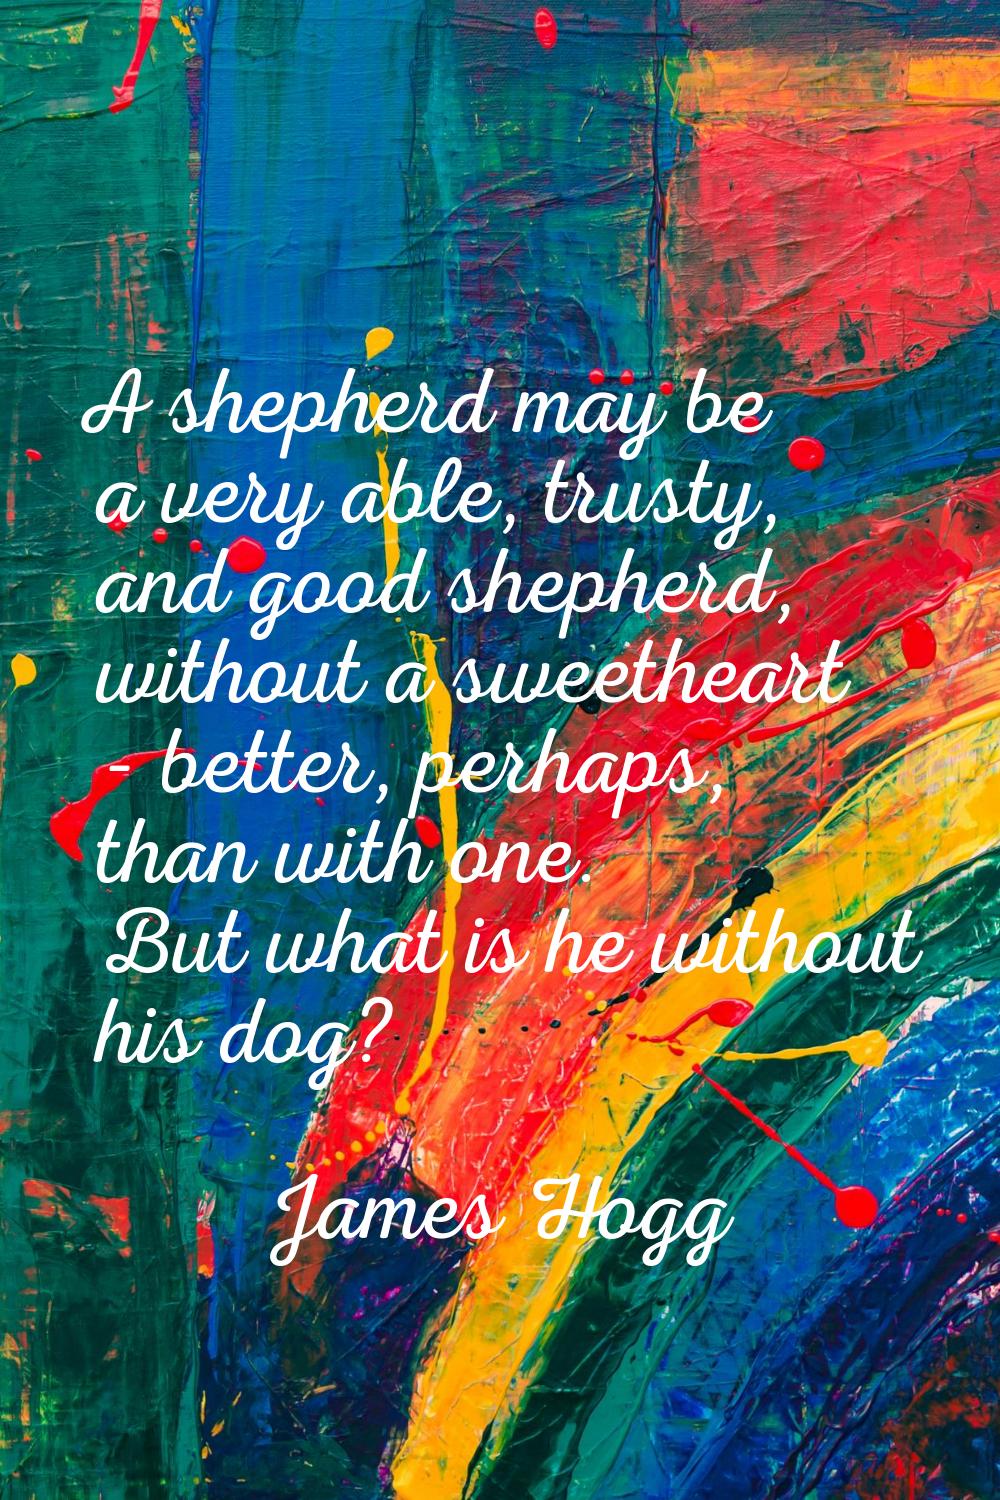 A shepherd may be a very able, trusty, and good shepherd, without a sweetheart - better, perhaps, t